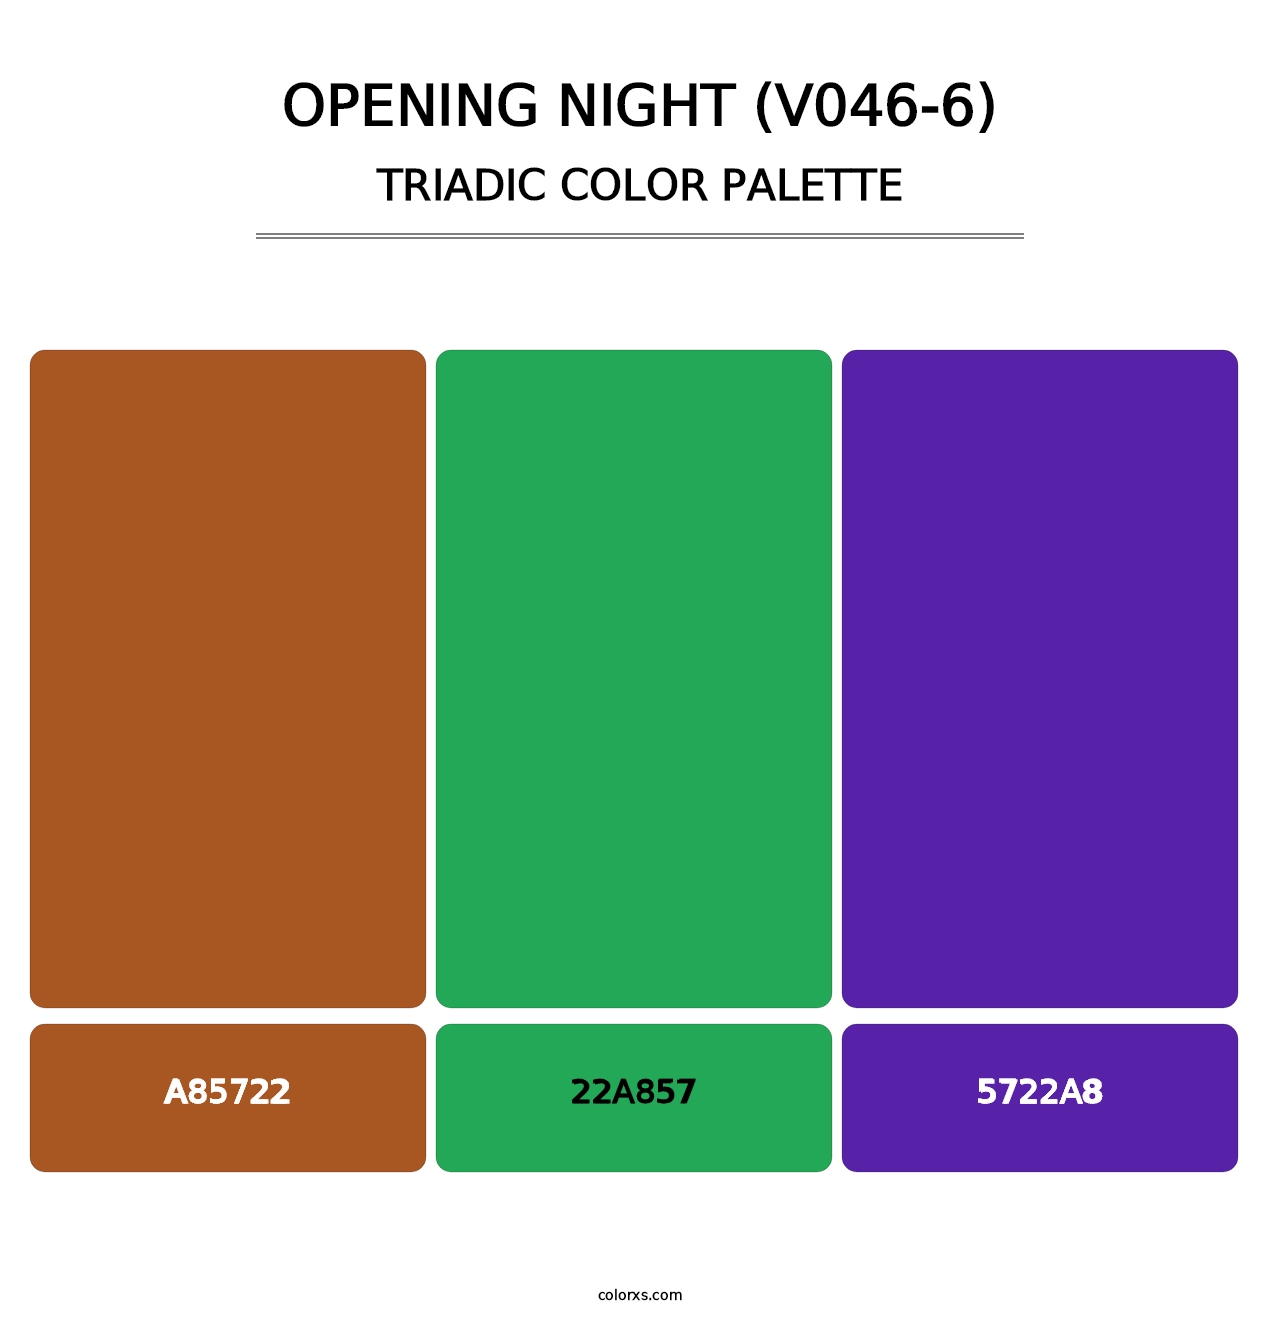 Opening Night (V046-6) - Triadic Color Palette